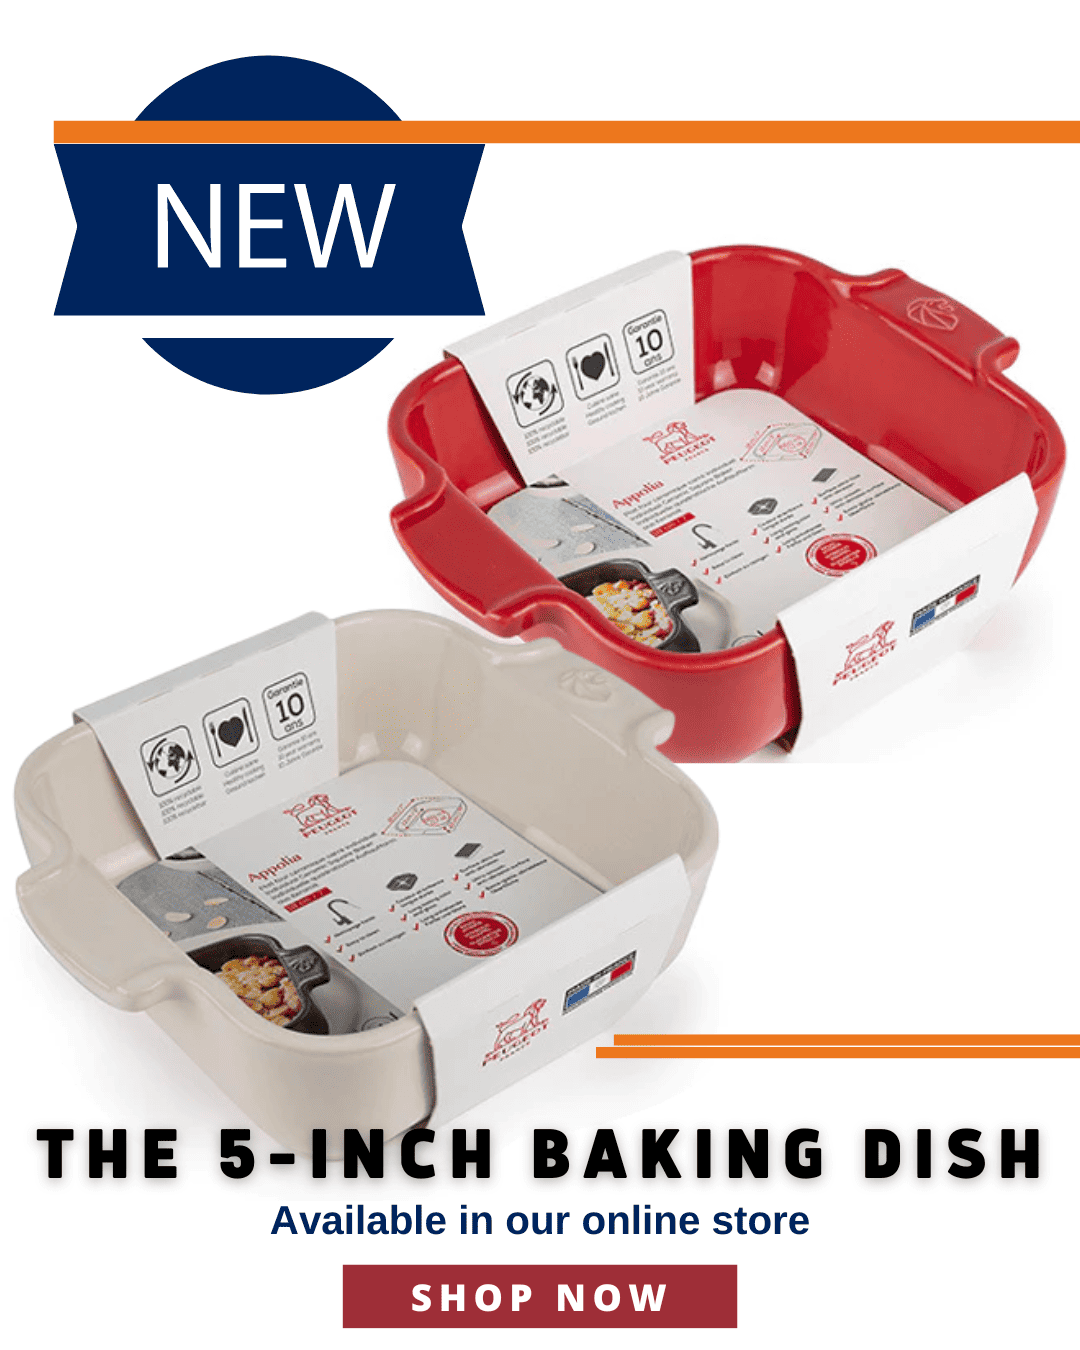 red and ecru 5-inch baking dish advertisement